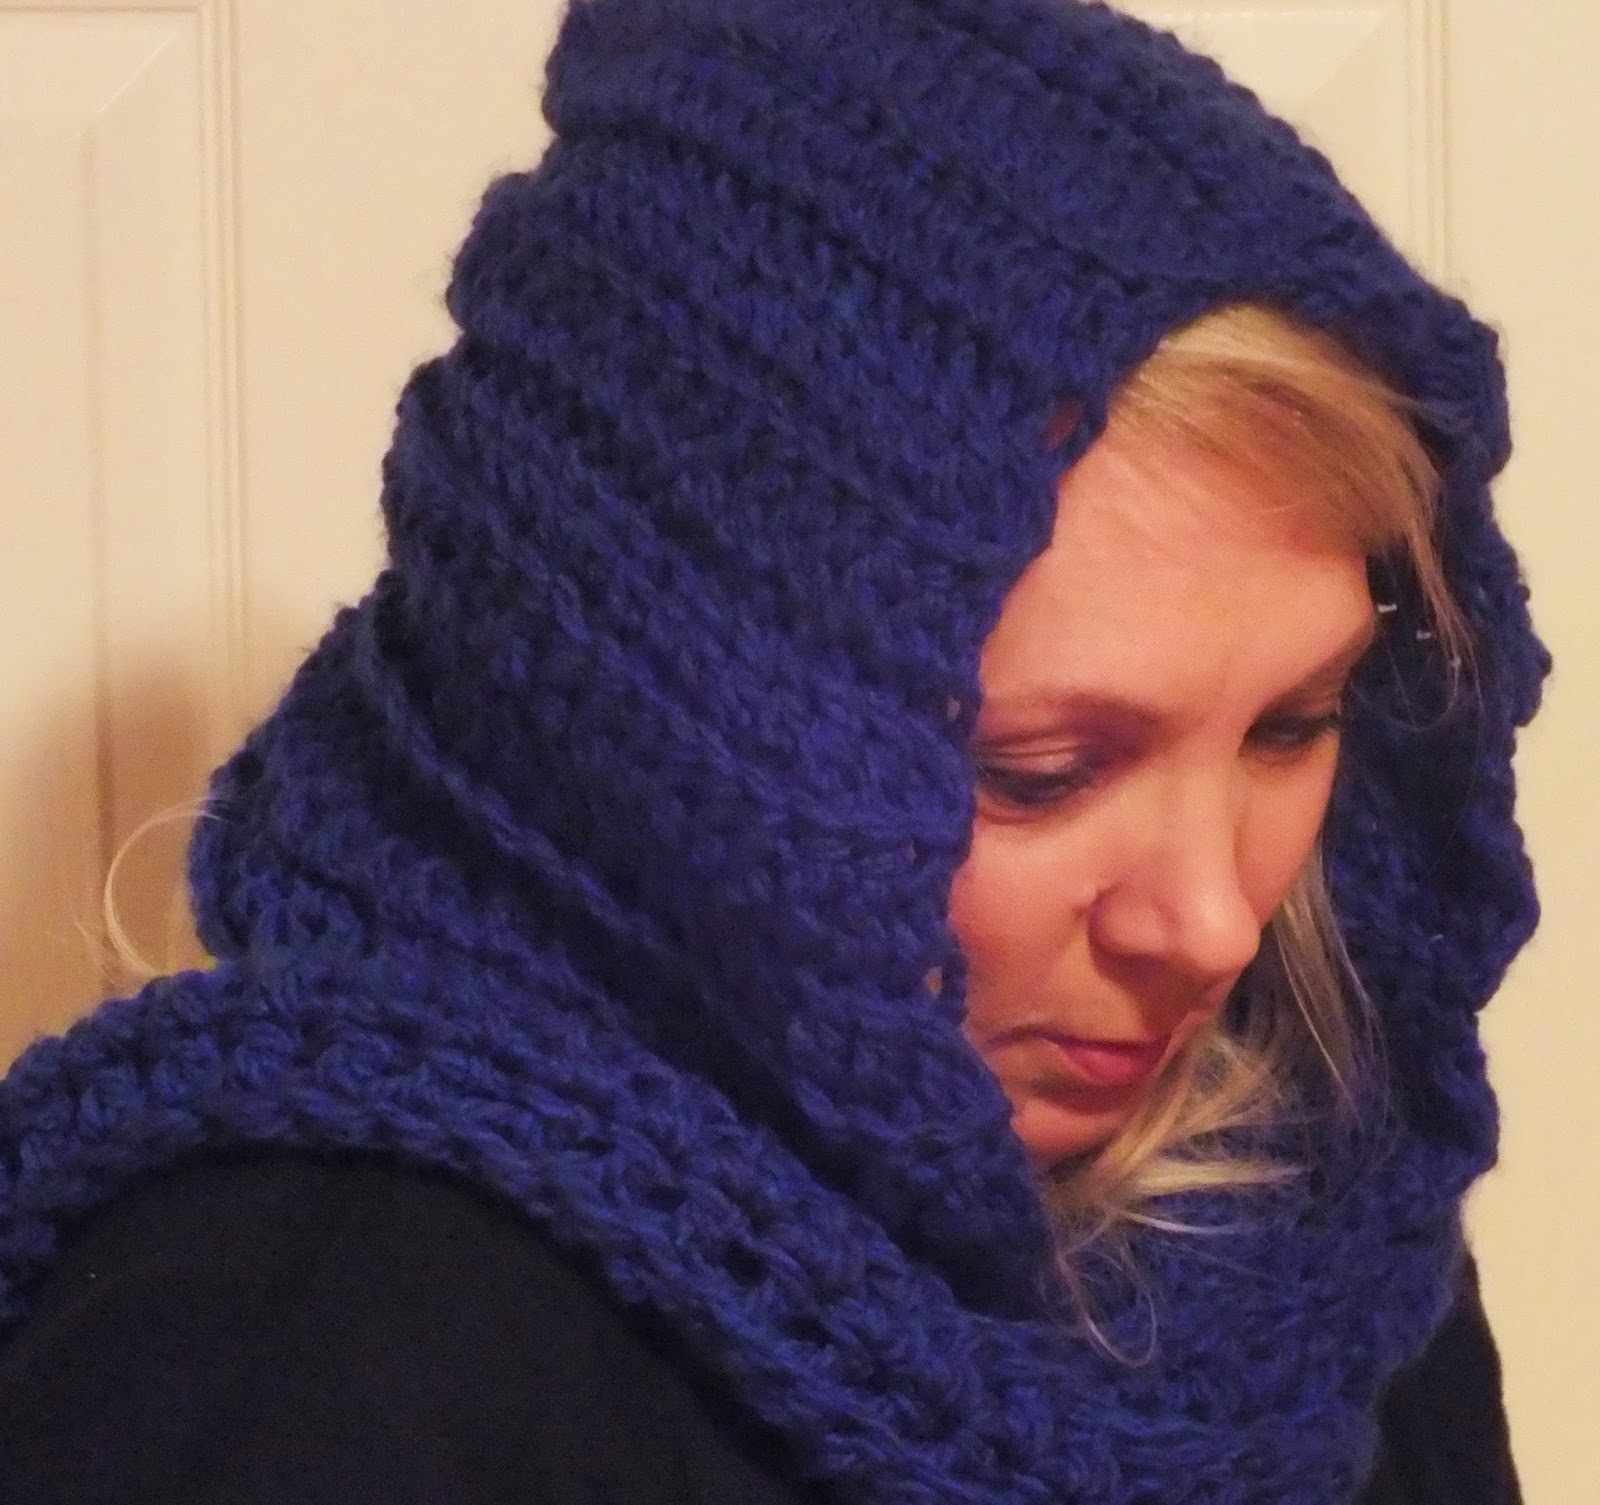 Connie's Spot© Crocheting, Crafting, Creating!: Hooded Winter Scarf